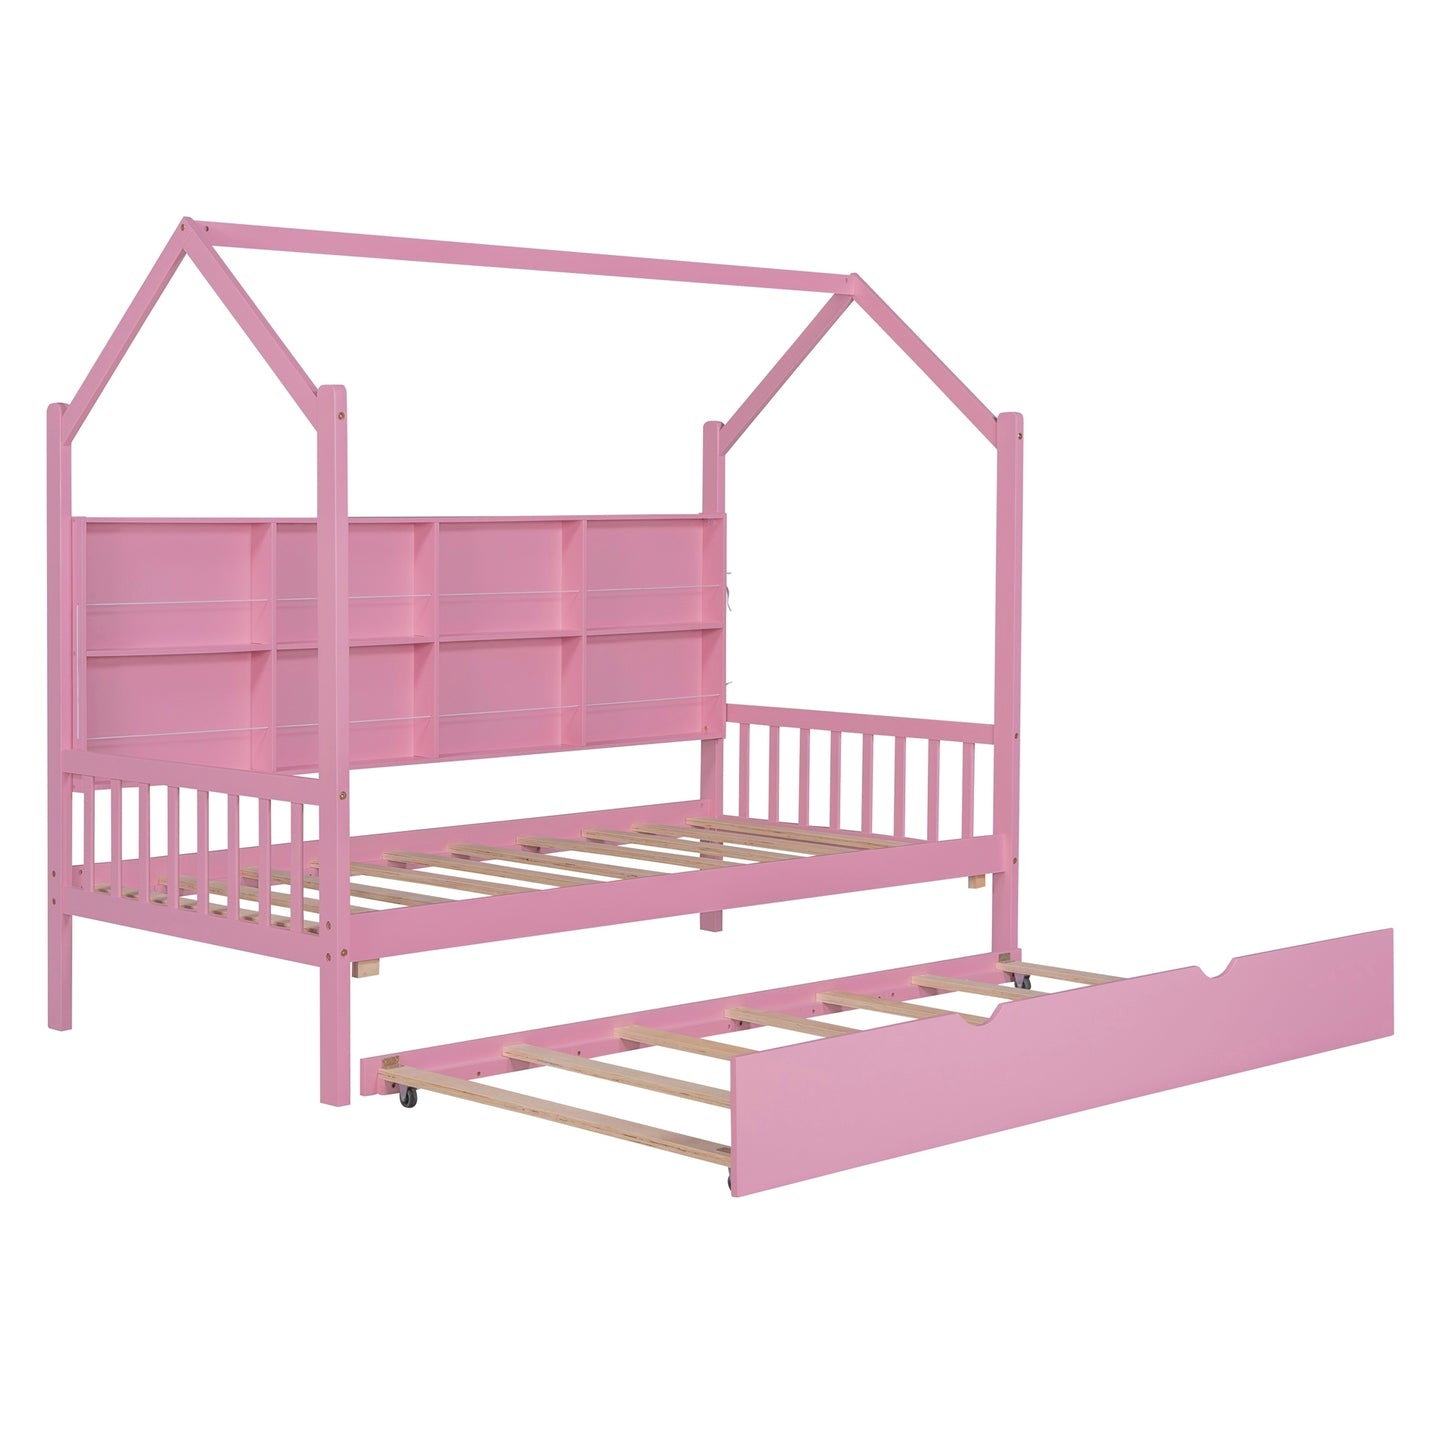 Wooden Twin Size House Bed with Trundle,Kids Bed with Shelf,Pink